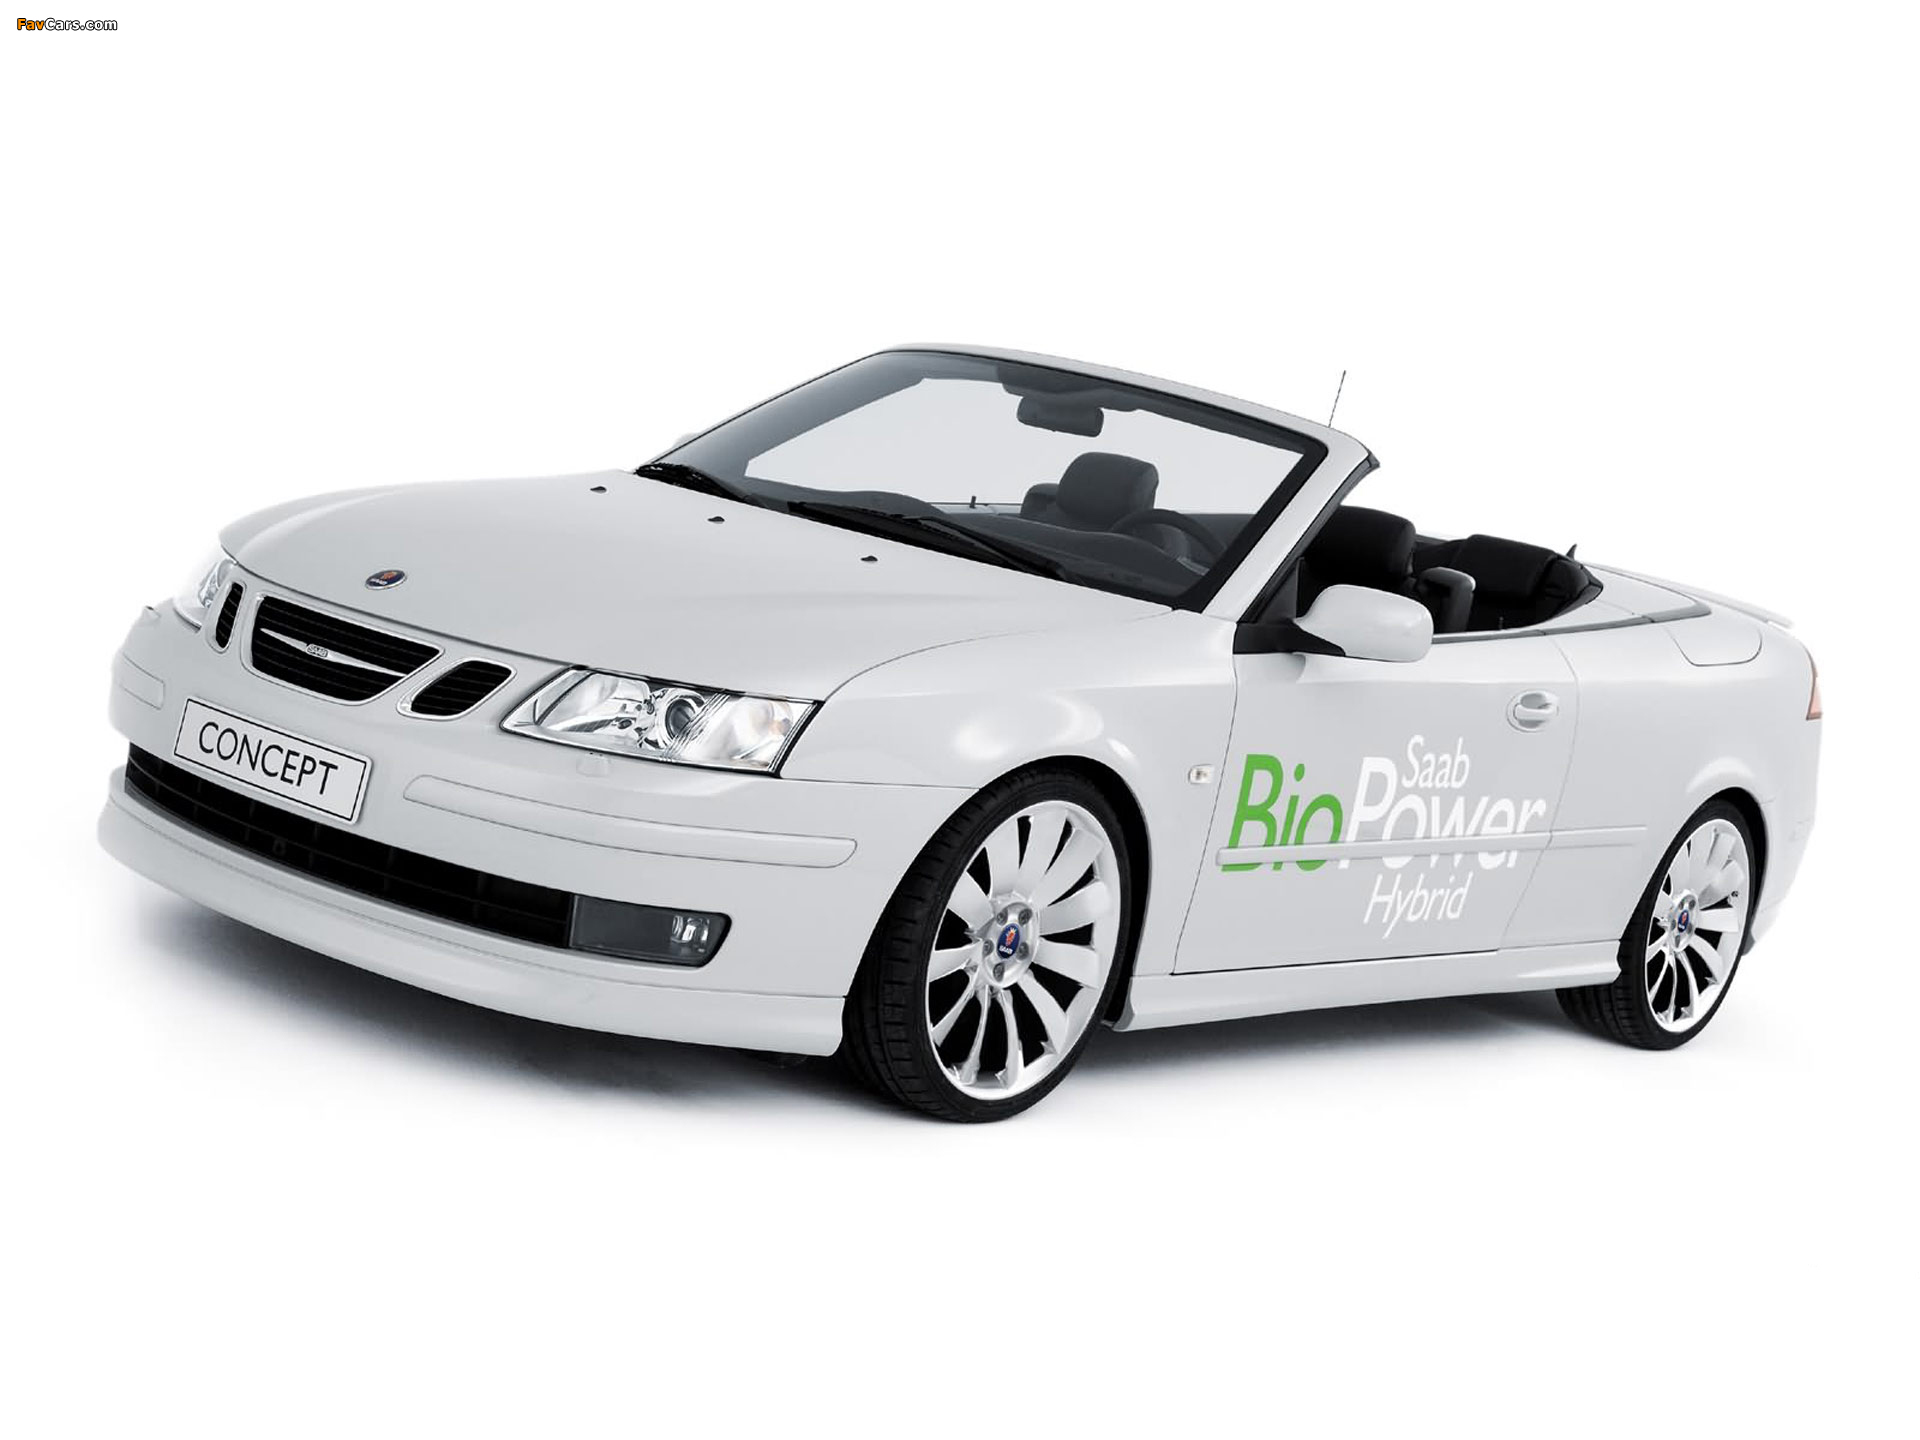 Saab 9-3 Convertible BioPower Hybrid Concept 2006 pictures (1920 x 1440)